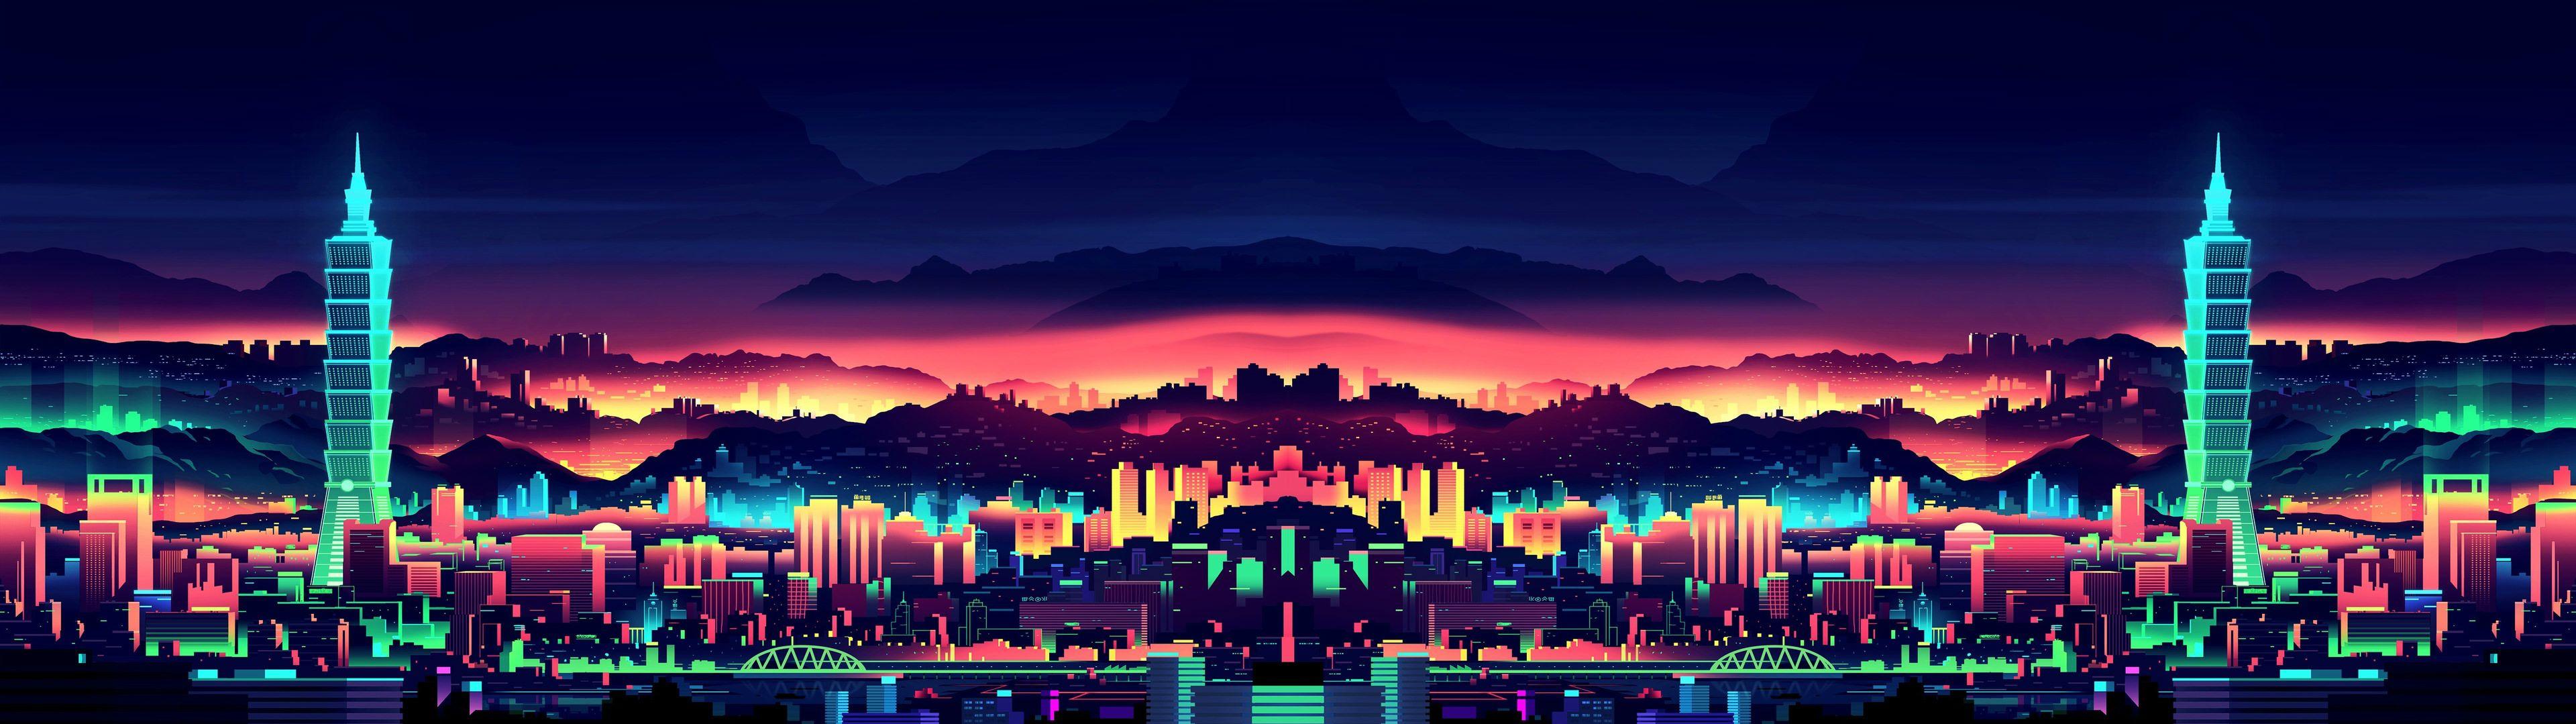 Neon City Wallpaper Versions Included